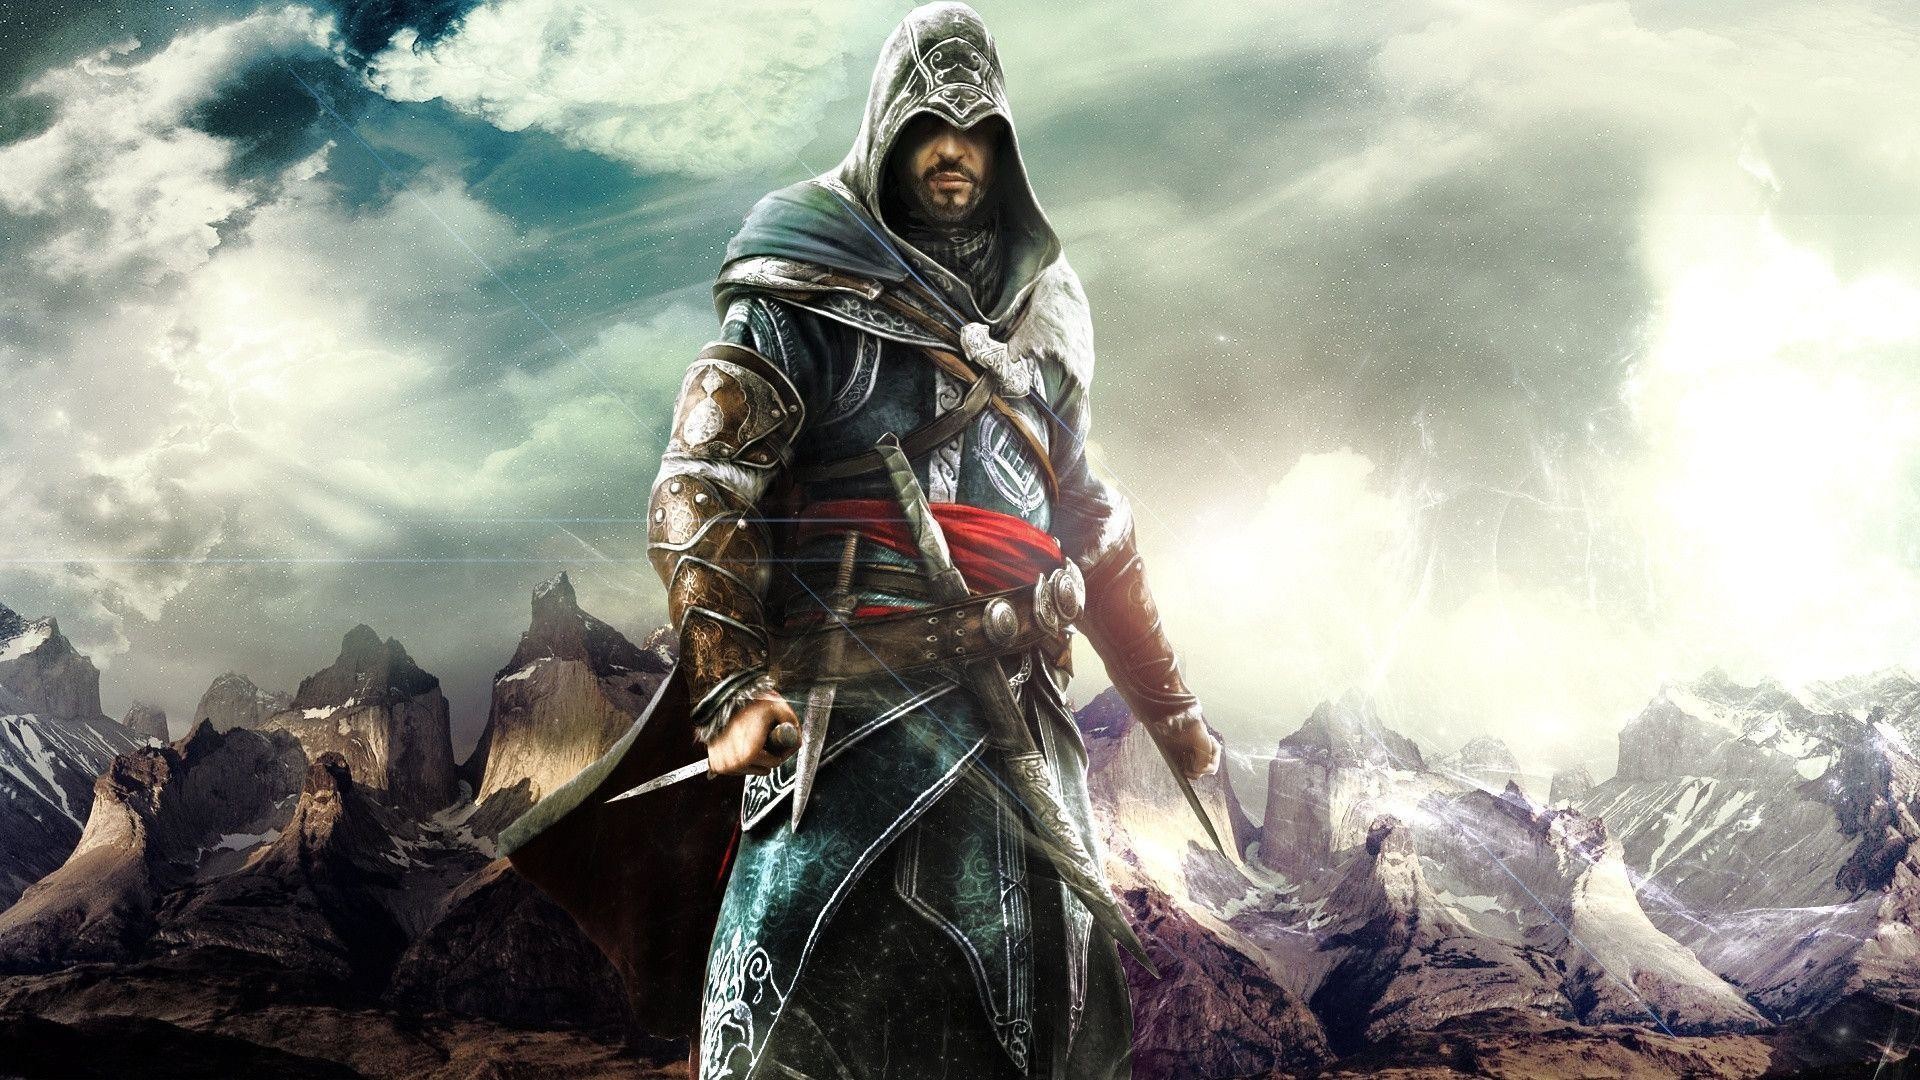 1920x1080 assassins creed game wallpapers | Desktop Backgrounds for Free HD .